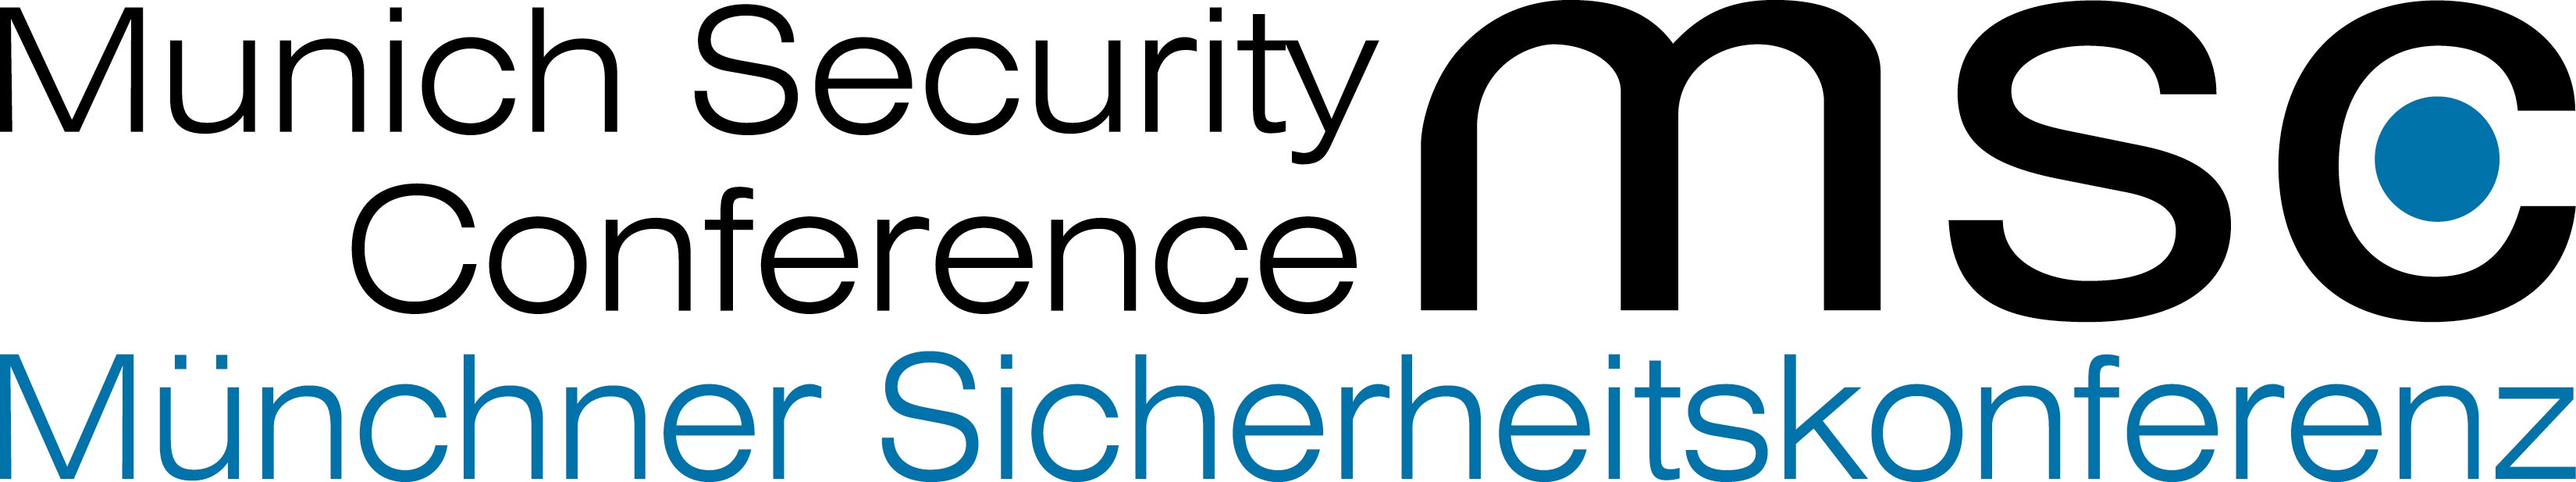 Munich Security Conference Logo